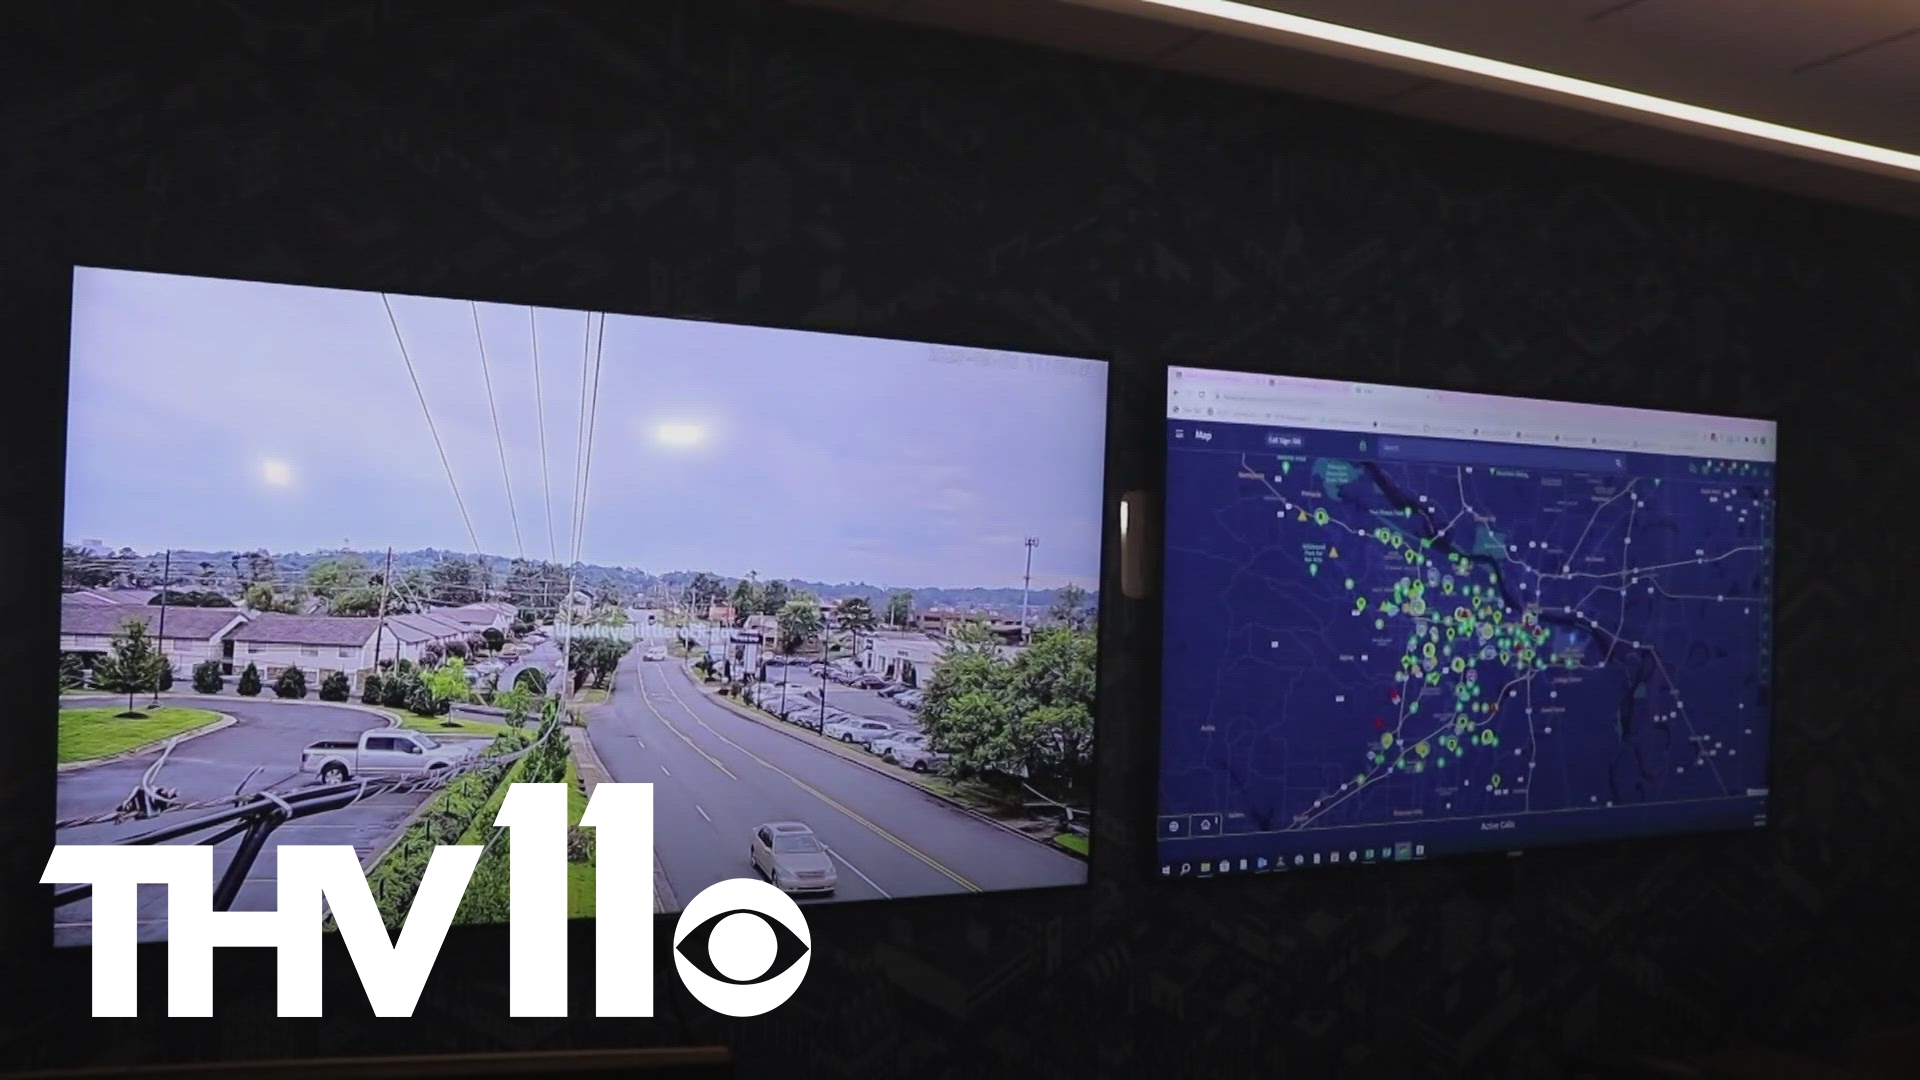 Artificial intelligence technology is already being used to help employees and residents in Little Rock. Here's how.